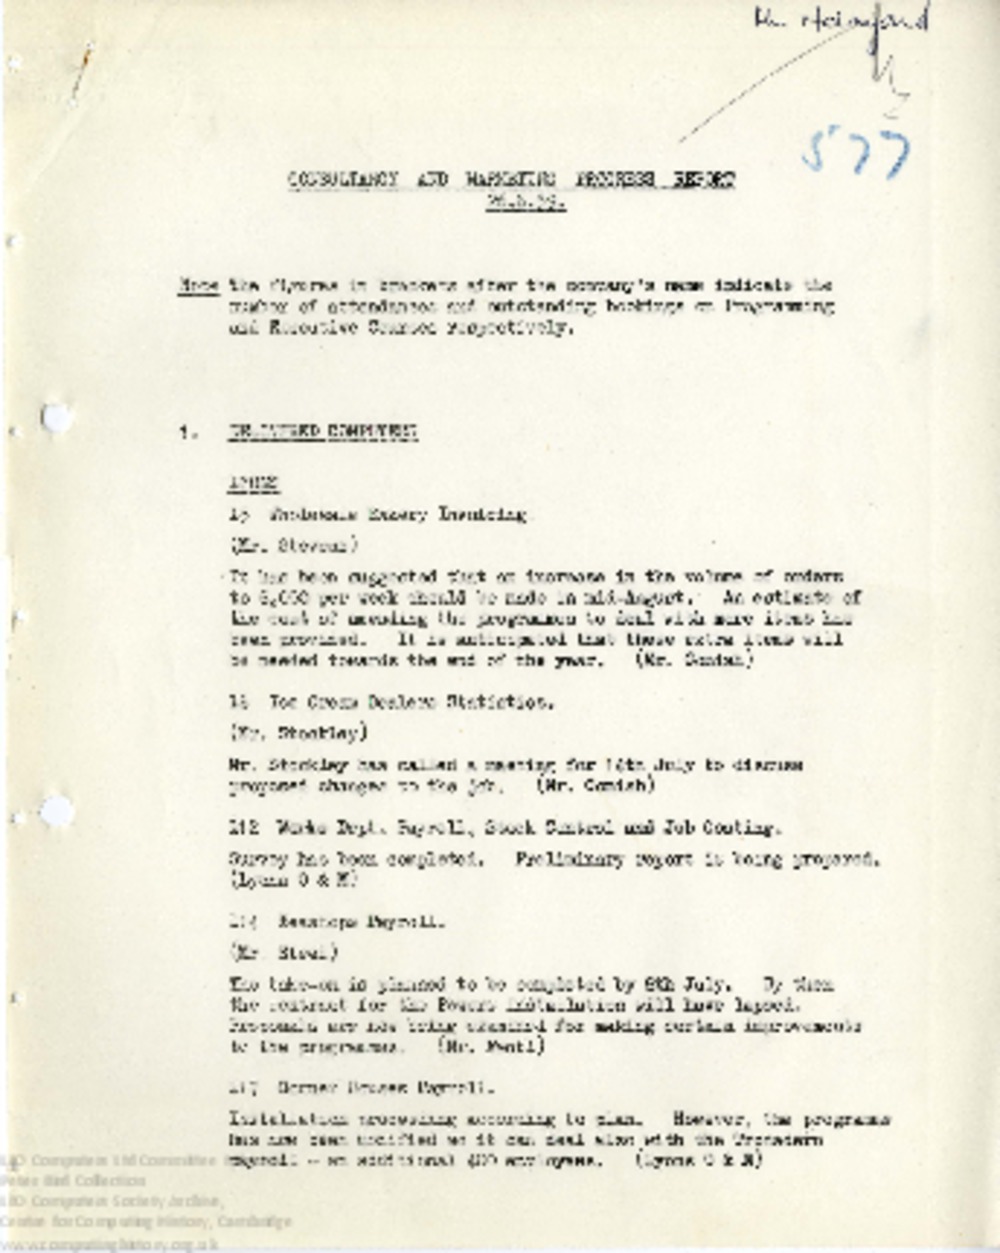 Article: 64478 Consultancy and Marketing Progress Report, 26th June 1959